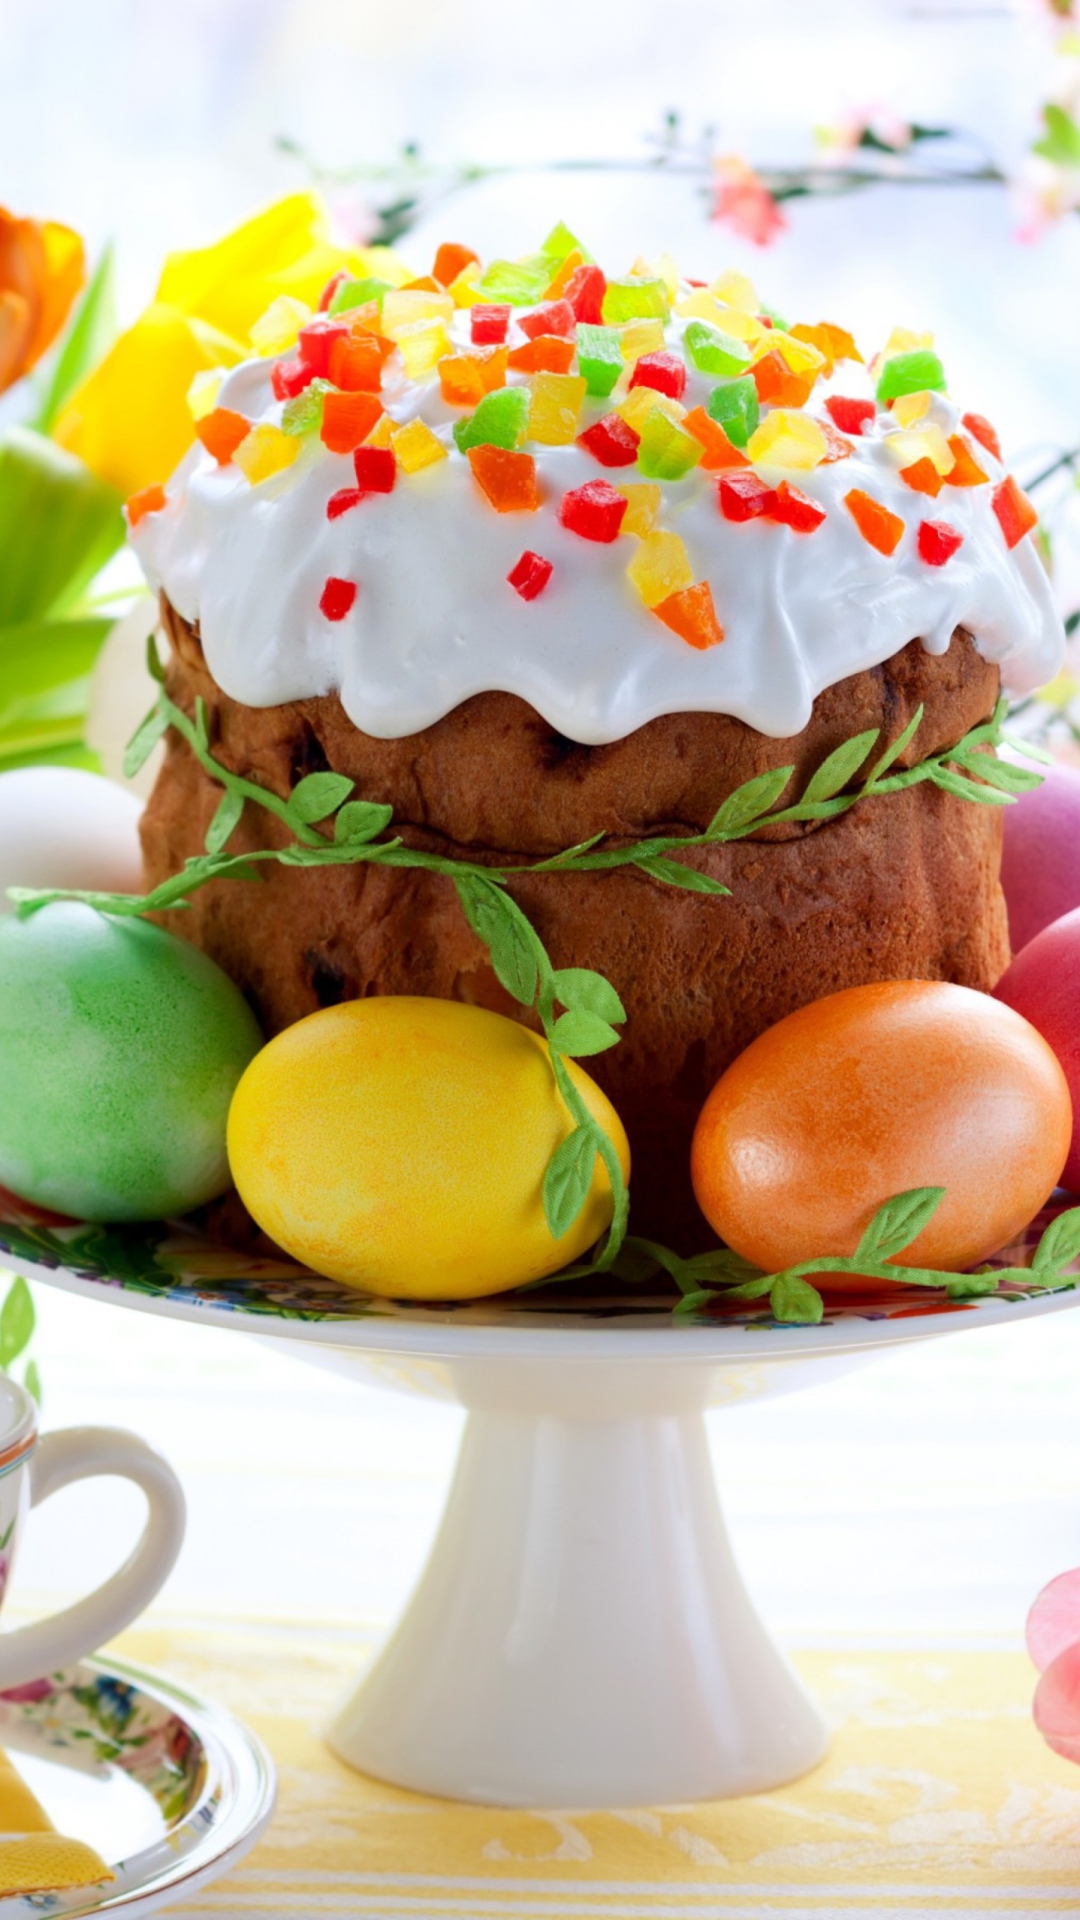 Das Easter Cake And Eggs Wallpaper 1080x1920